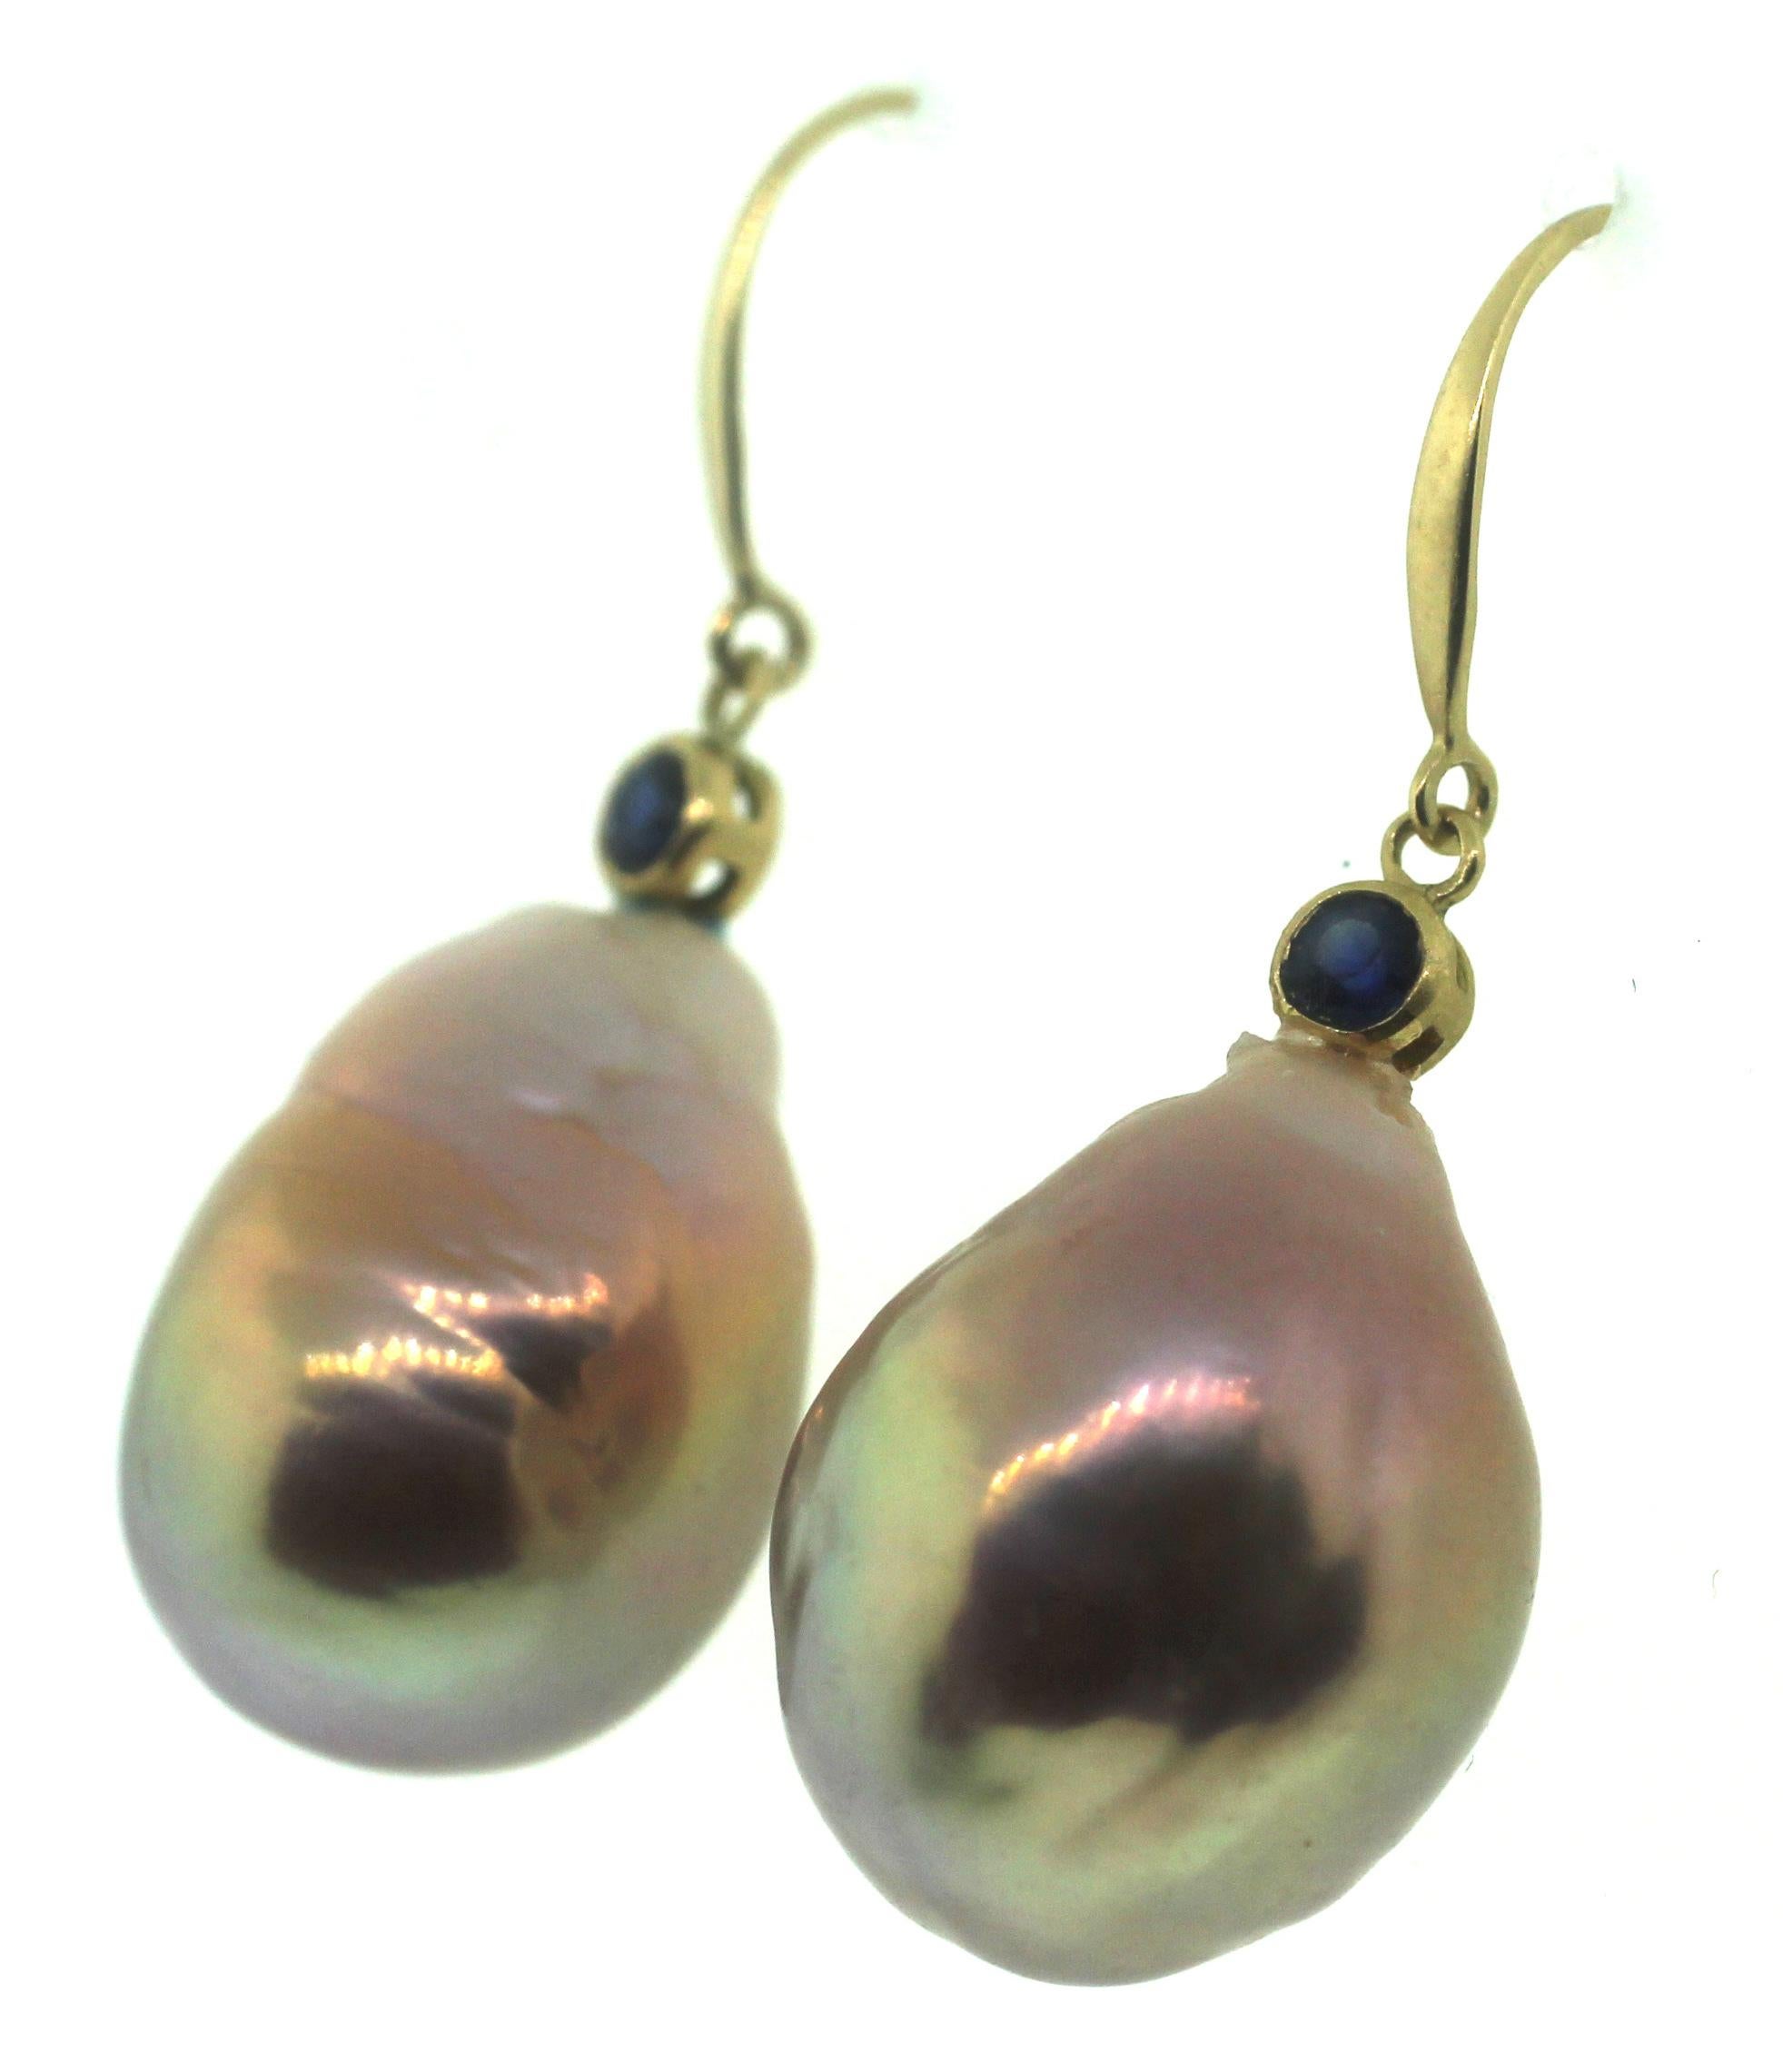 Bead Hakimoto 17x13 mm Natural Color Baroque pearl 18k Saphhire Earrings For Sale